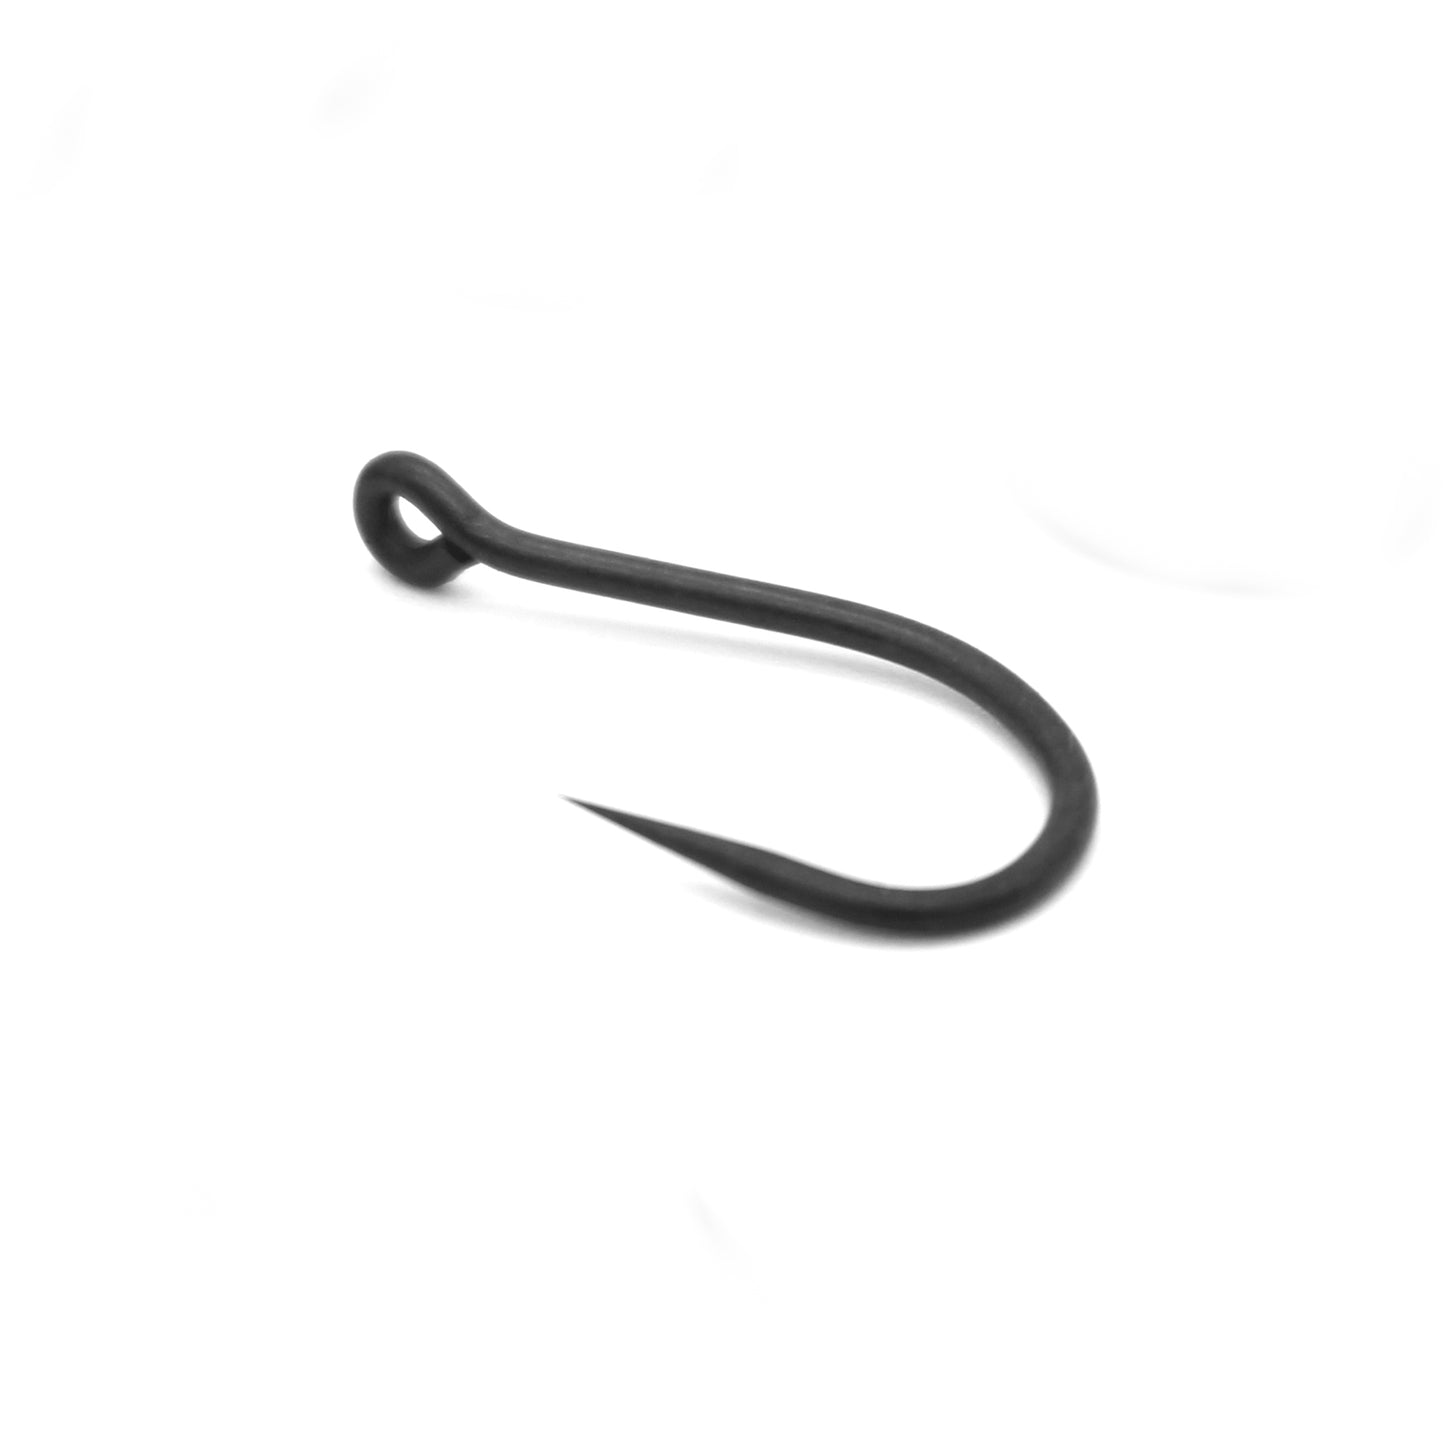 Deception Angling SPC Barbless Fishing Hook